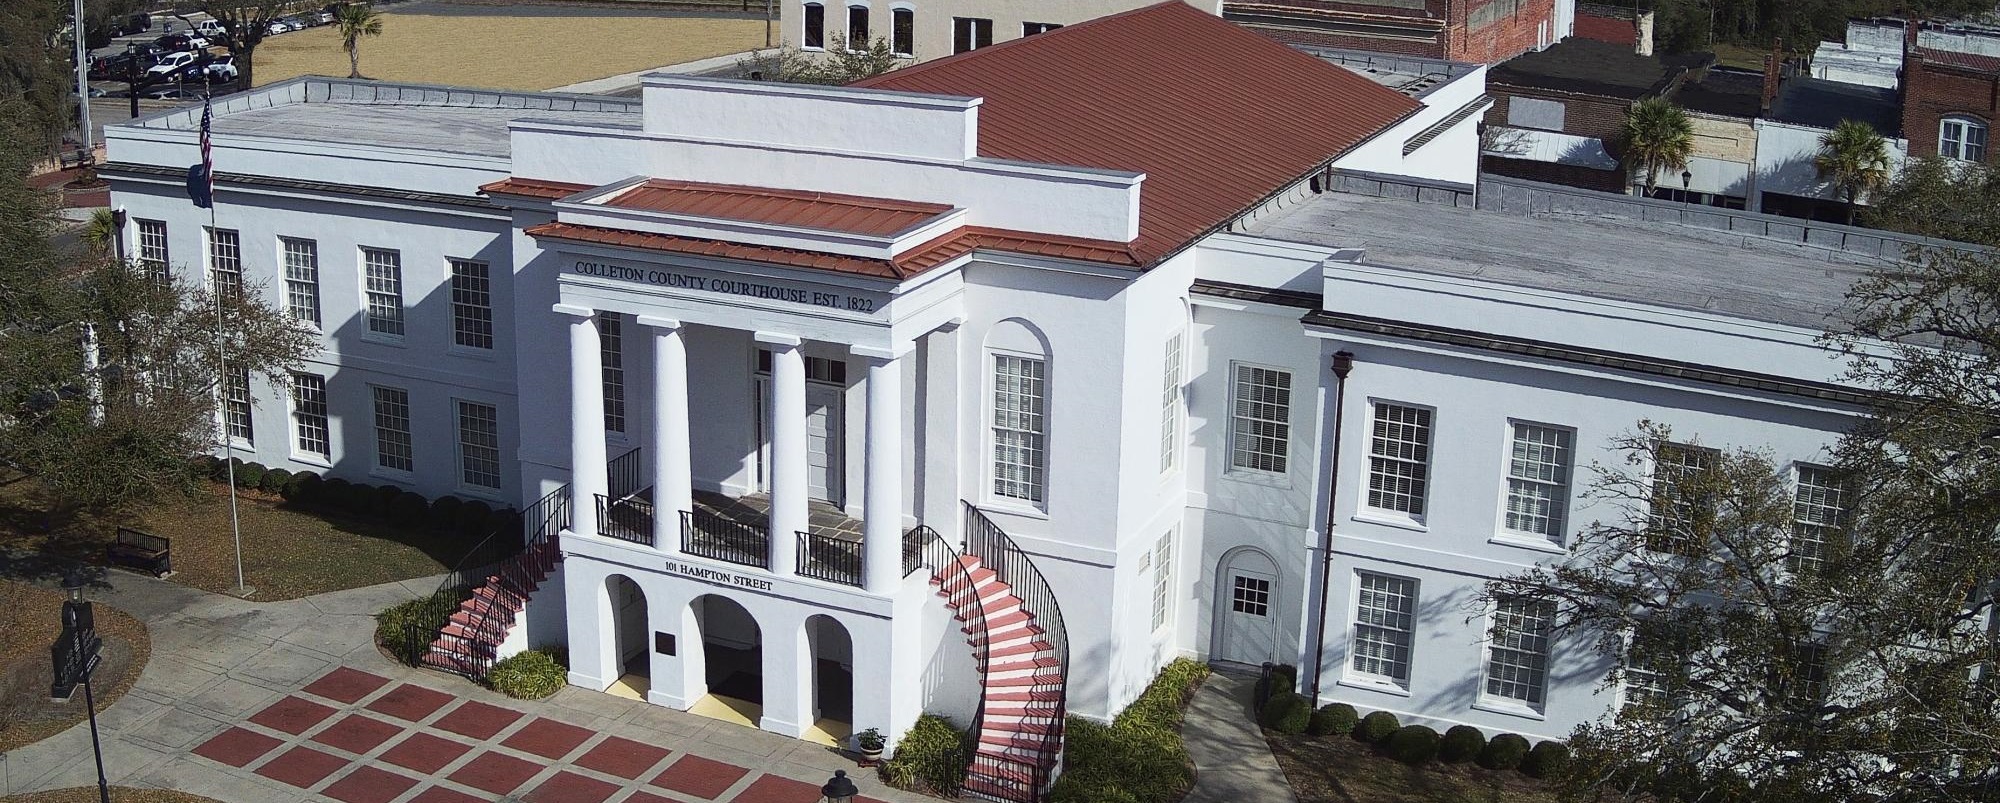 Aerial photo of Courthouse